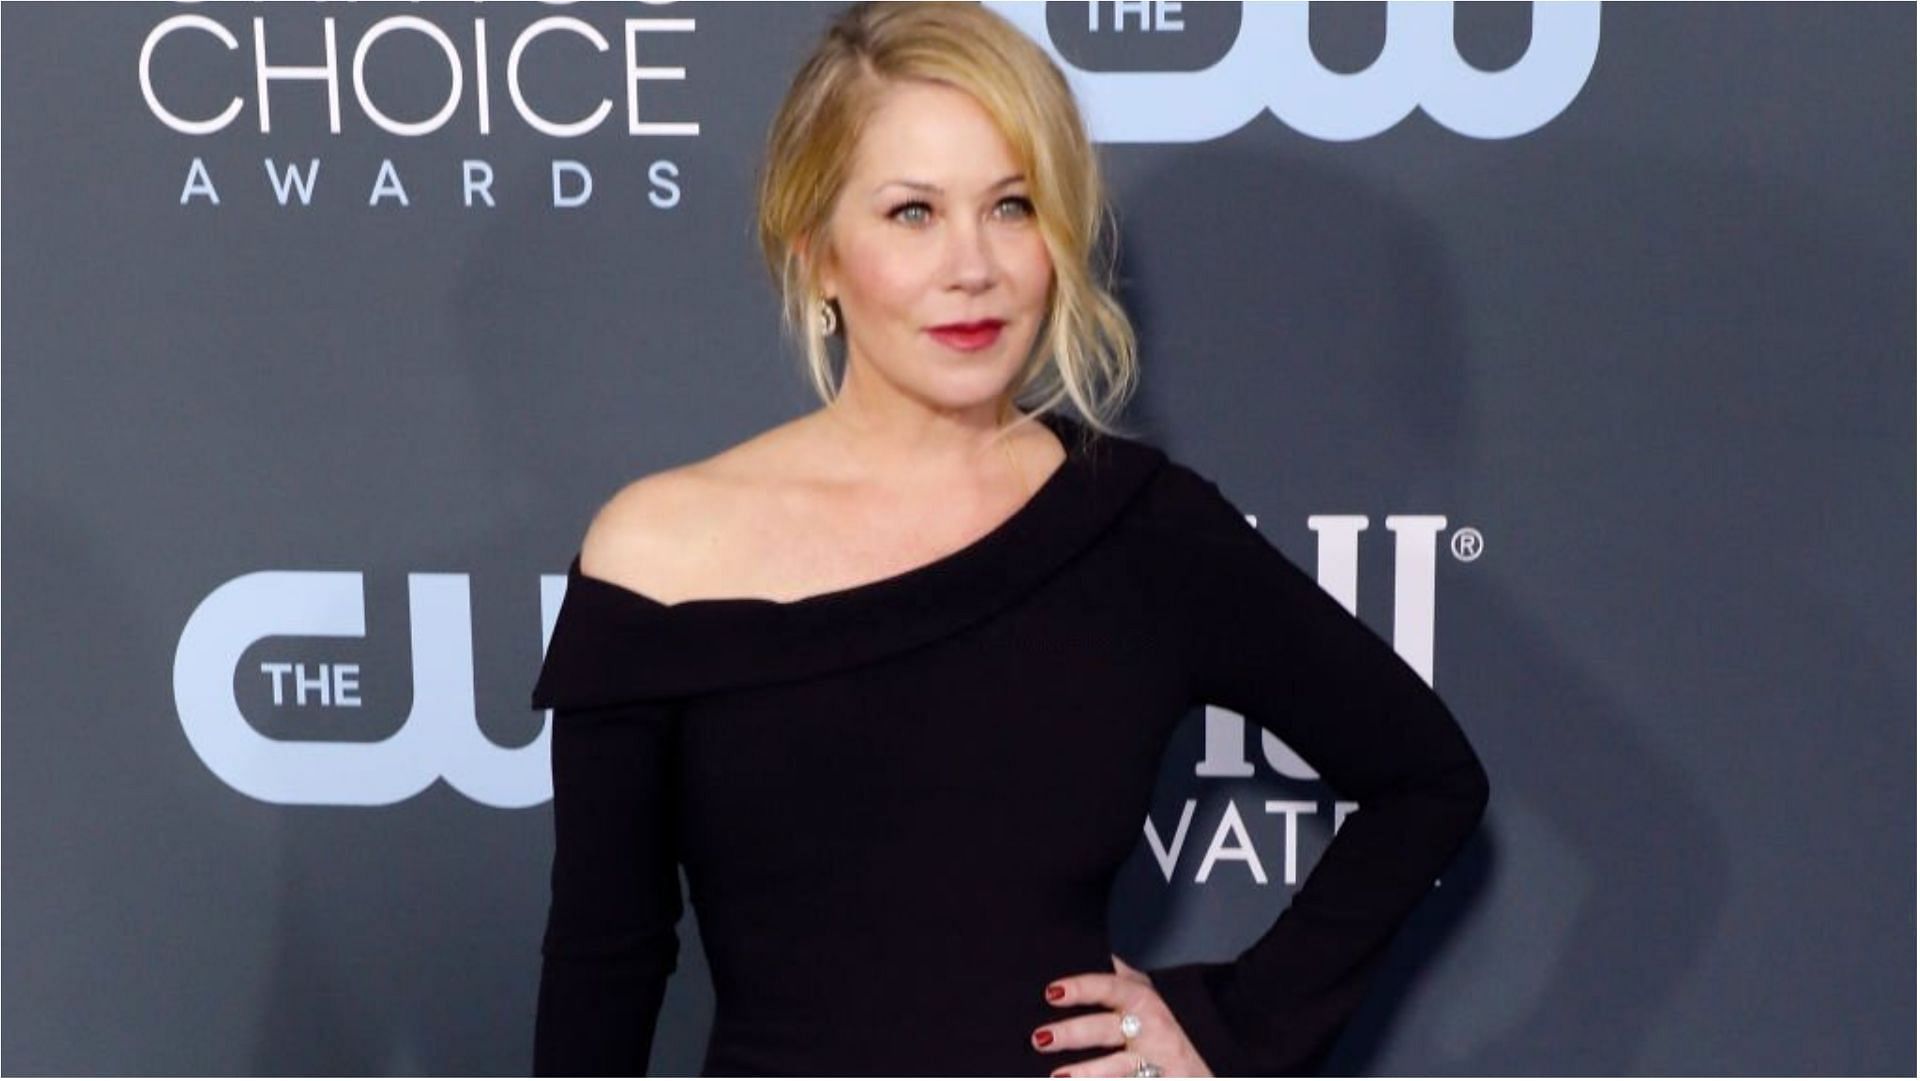 Christina Applegate was diagnosed with breast cancer in 2008 (Image via Taylor Hill/Getty Images)